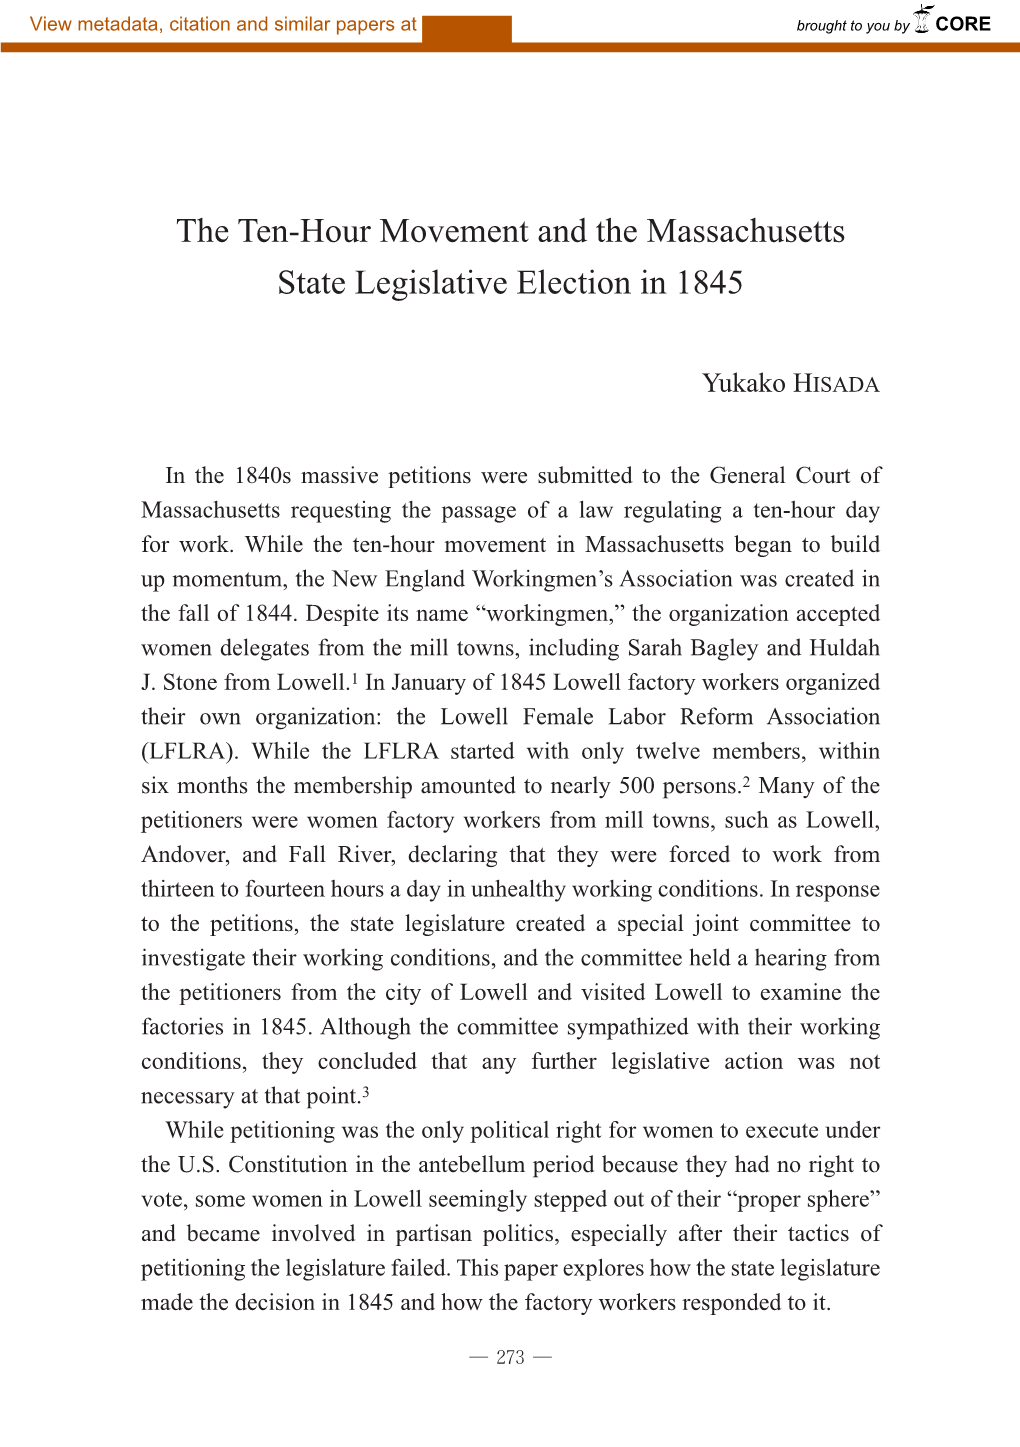 The Ten-Hour Movement and the Massachusetts State Legislative Election in 1845